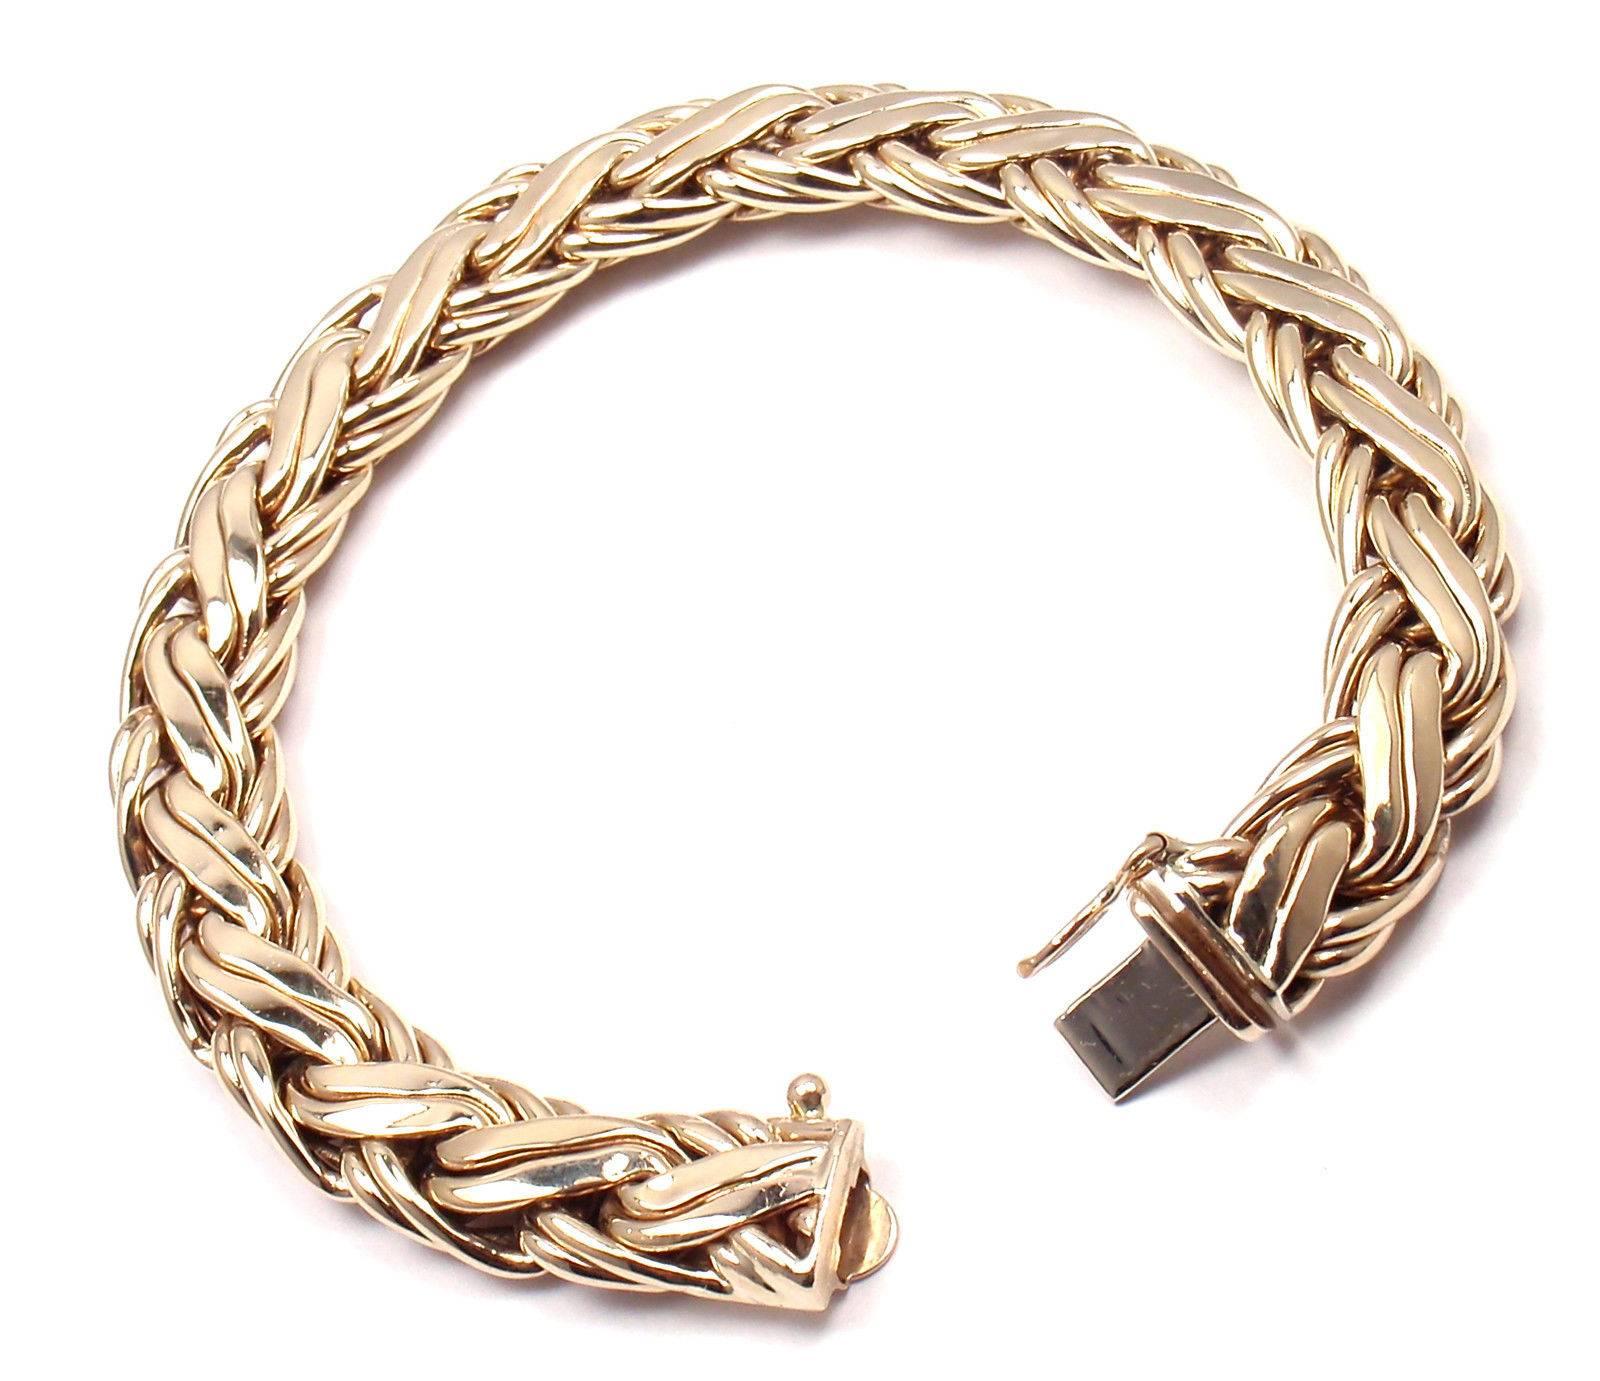 Yellow Gold Russian Weave Bracelet 
Details: 
Length: 7.5"
Width: 10mm
Weight: 23 grams
Stamped Hallmarks: Tiffany& Co 585   14k gold
*Free Shipping within the United States*

YOUR PRICE: $2,500

T1239mmld